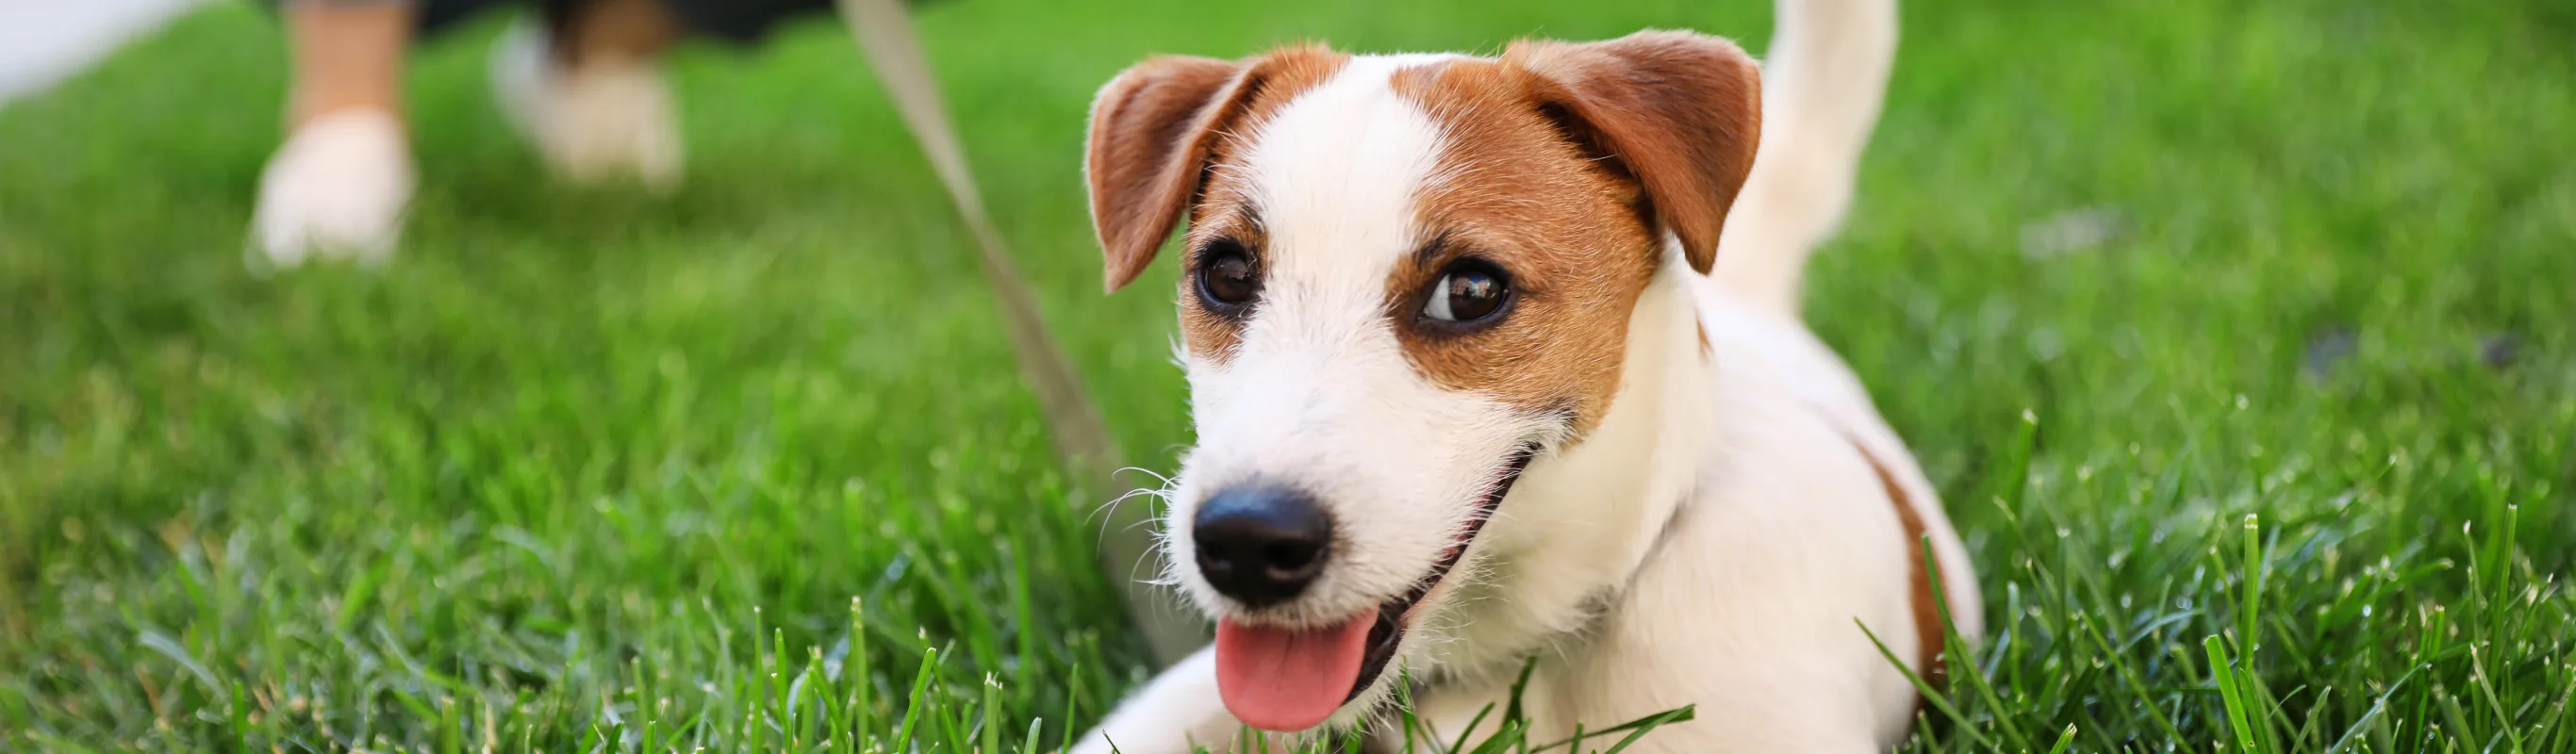 Jack russell sitting in the grass with his tongue out